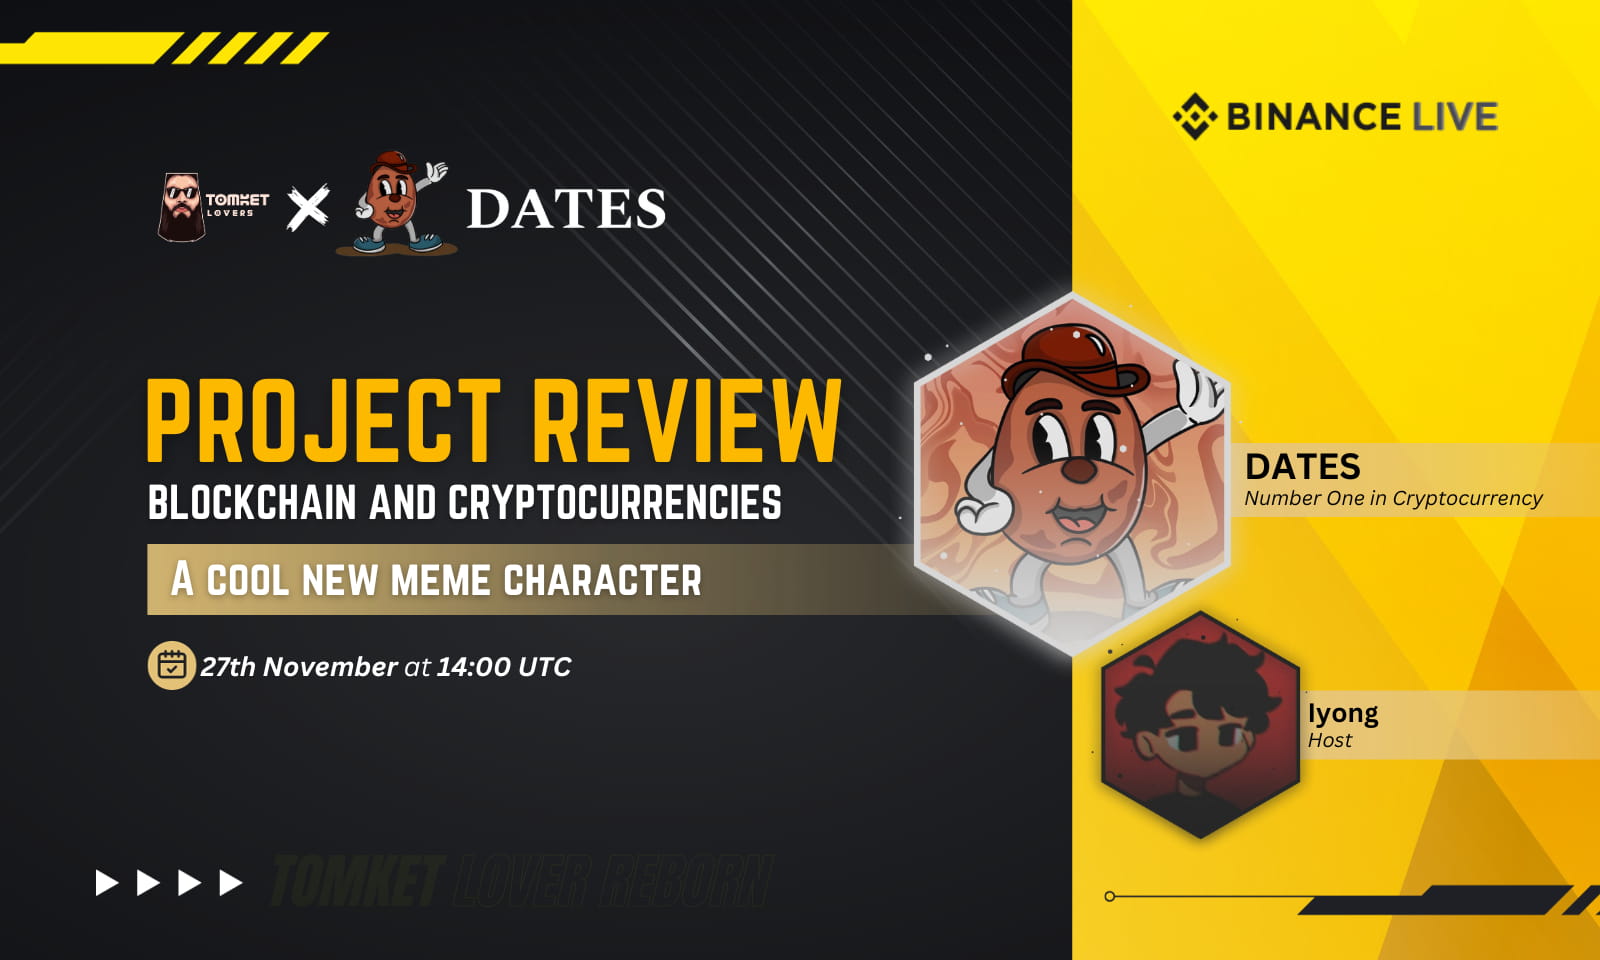 Project Review : A cool new meme character named DATES